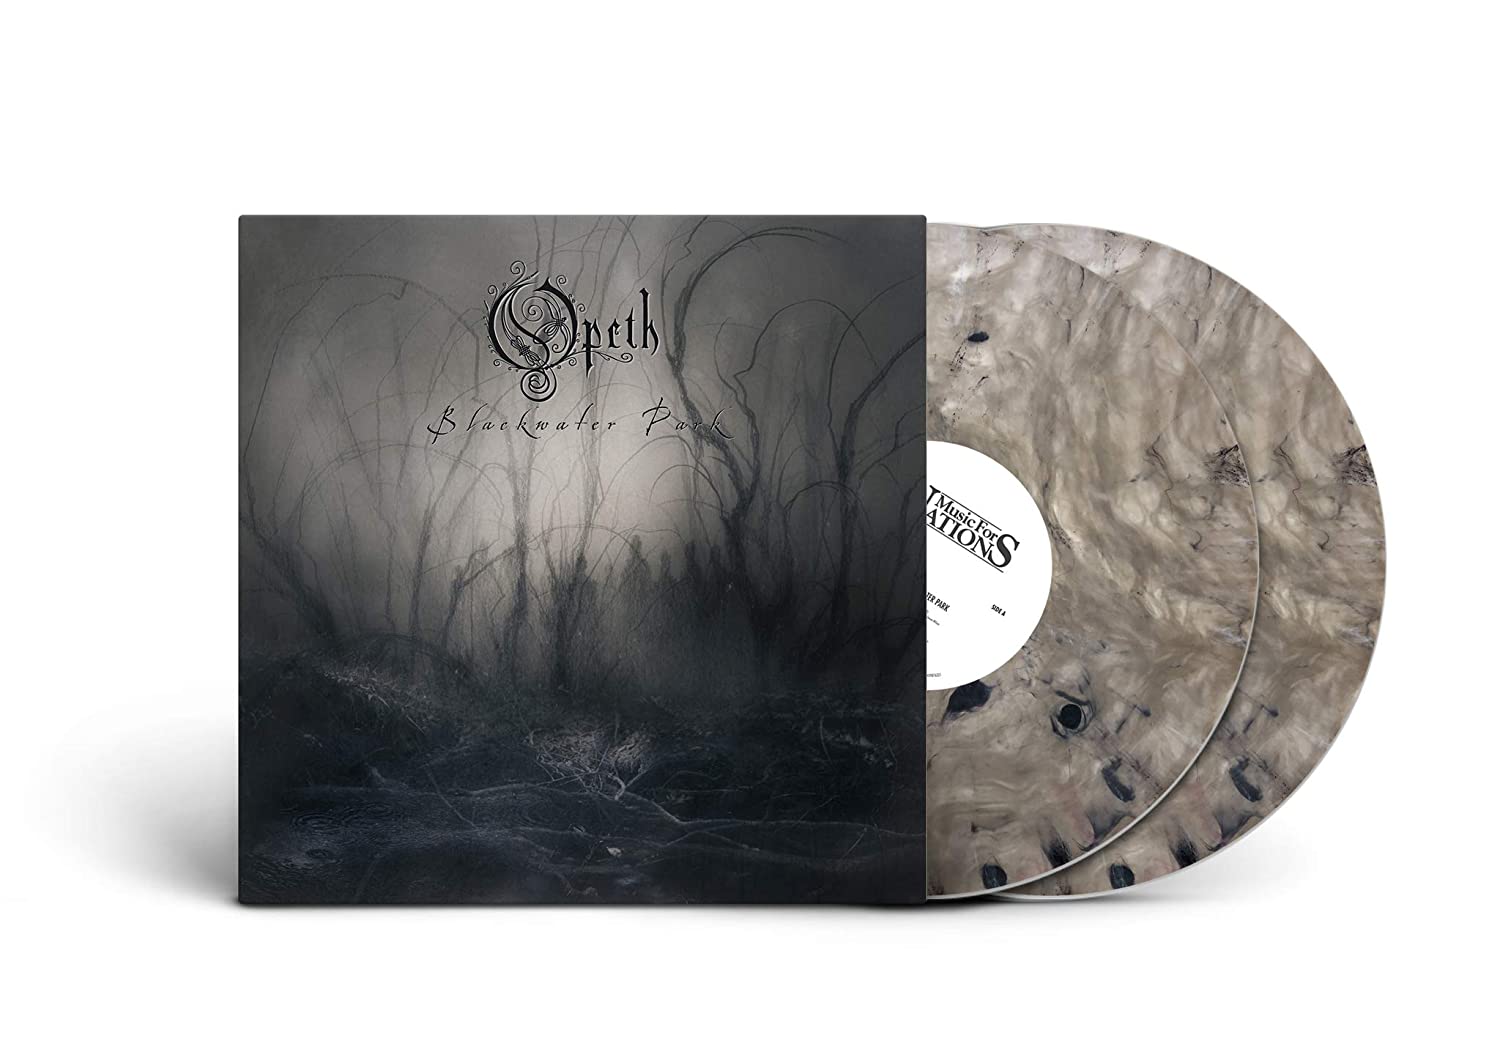 [DAMAGED] Opeth - Blackwater Park (20th Anniversary Edition) [Clear, Black, and White Vinyl]